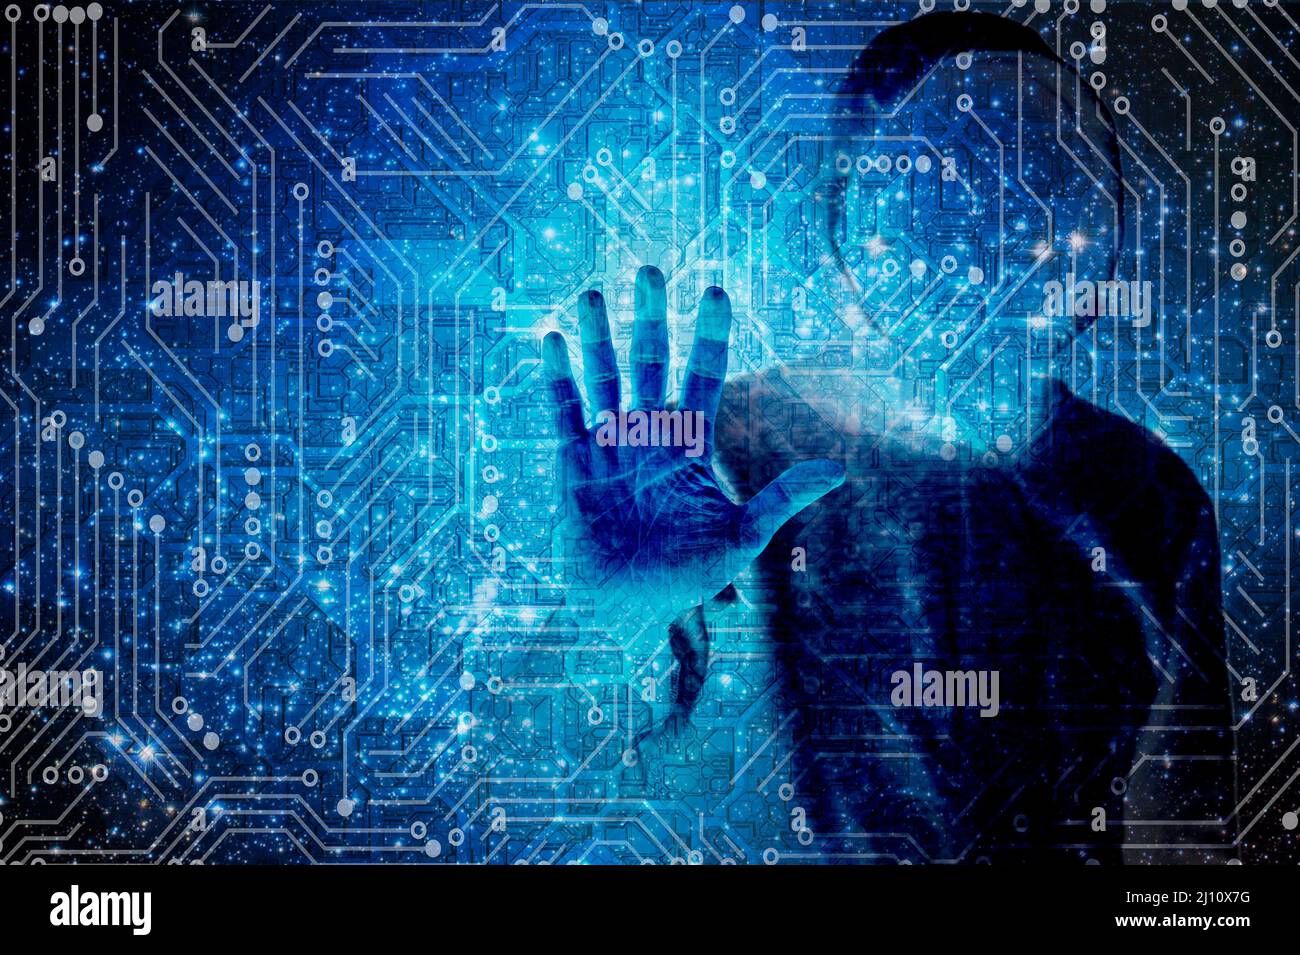 hoded hacker or cybercriminal Stock Photo